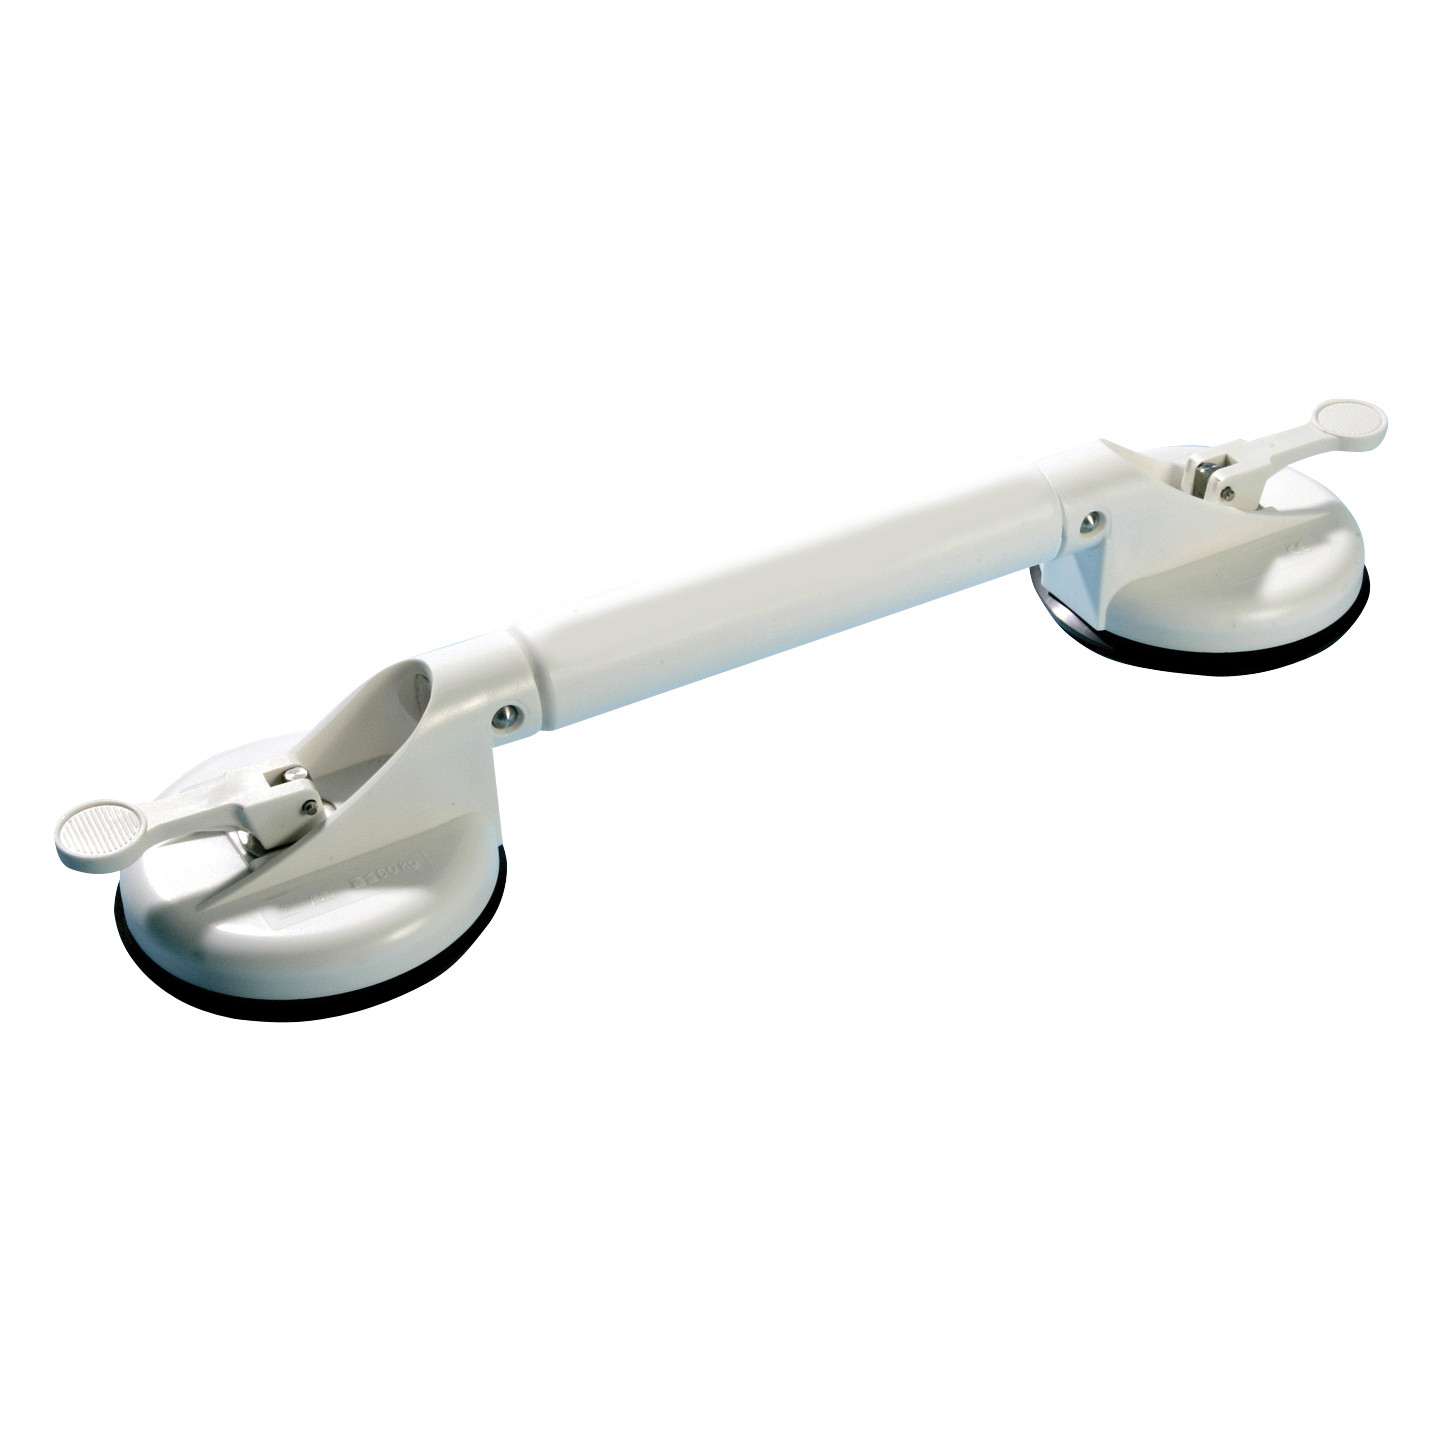 Adjustable Grab Bar w/ Suction Cups - Open Box